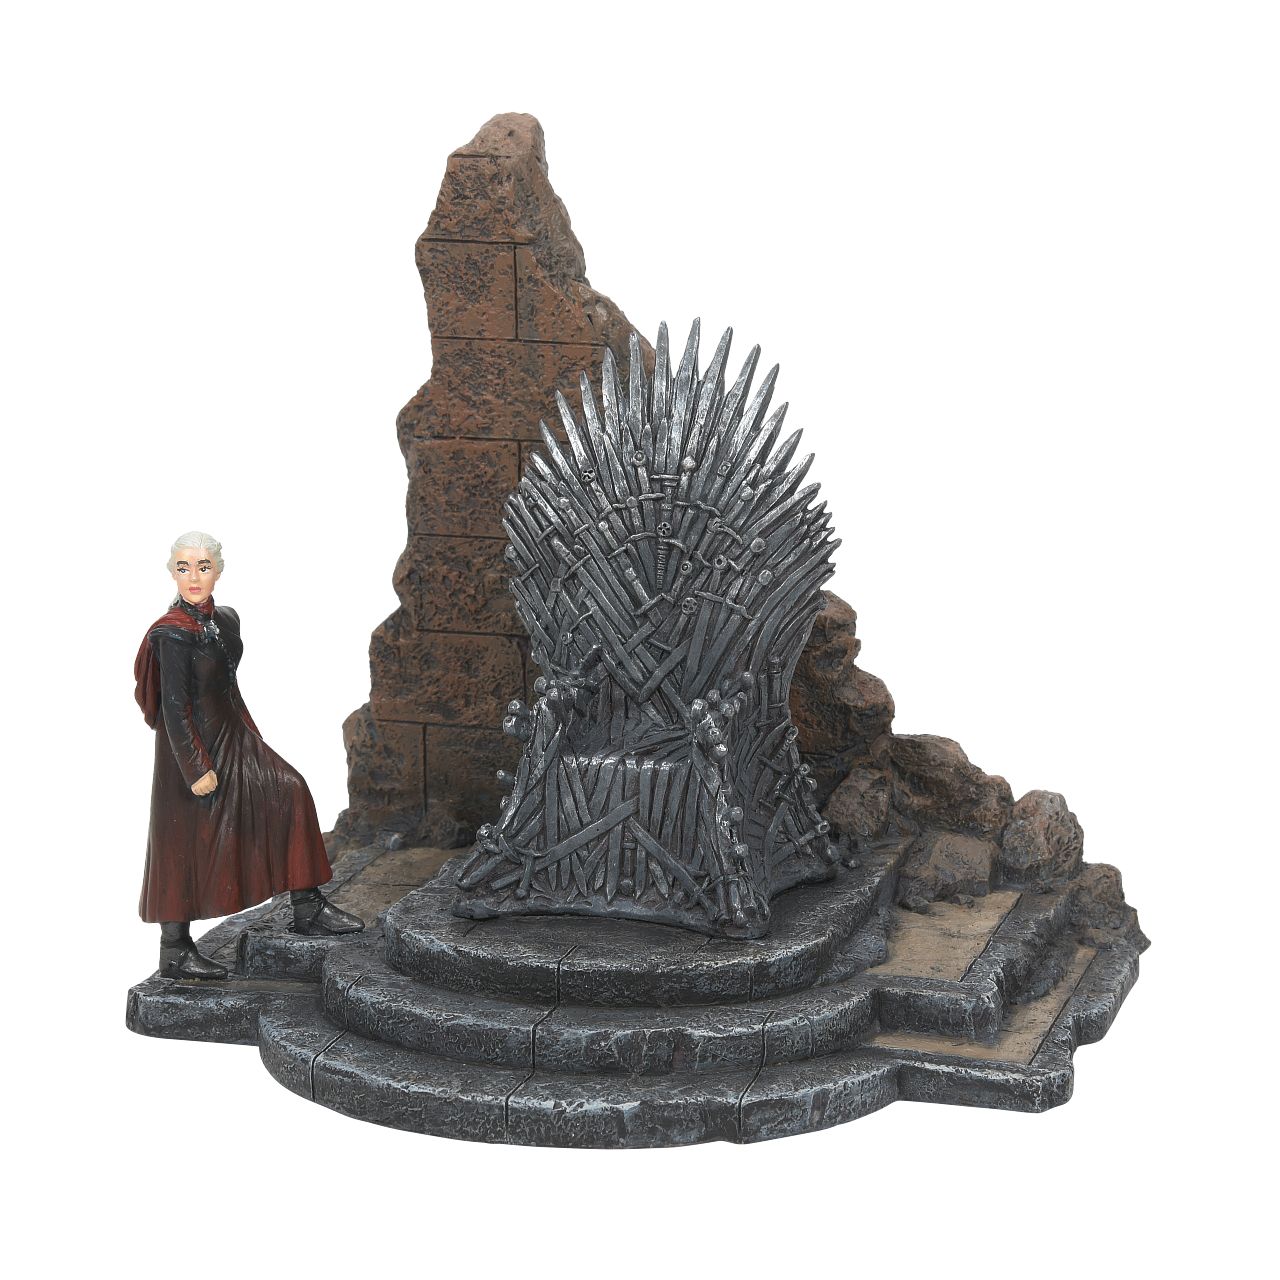 Dept 56 Daenerys Targaryen Figurine - Game of Thrones  Daenerys of the House Targaryen, the First of Her Name, Breaker of Chains and Mother of Dragons has been immortalised in this highly detailed figurine. Captured in this iconic scene from series 8 of Game of Thrones.